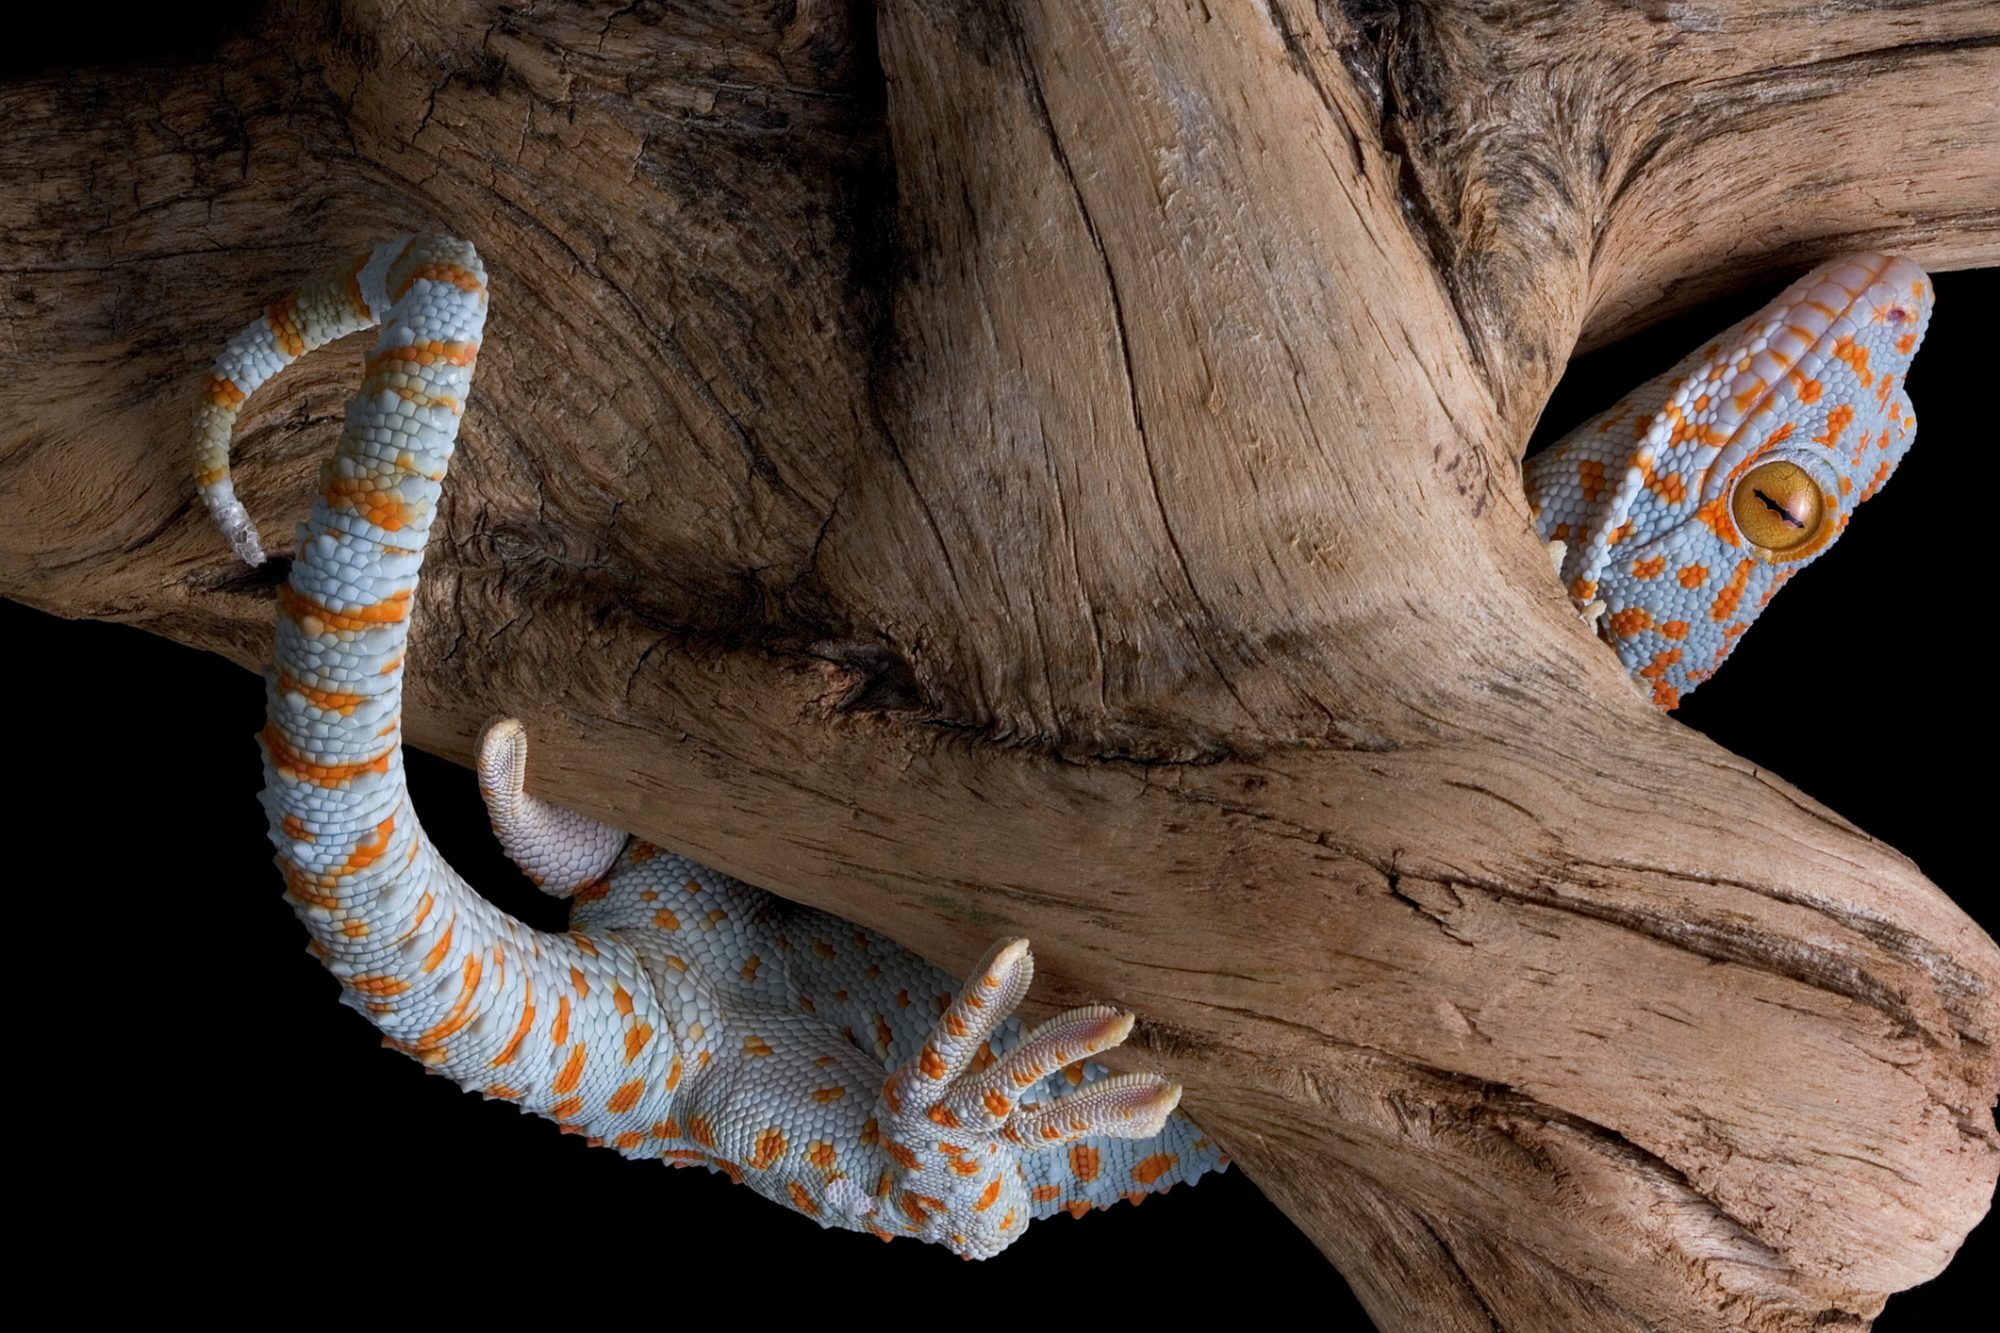 What's the secret to gecko feet that allows them to stick to surfaces?